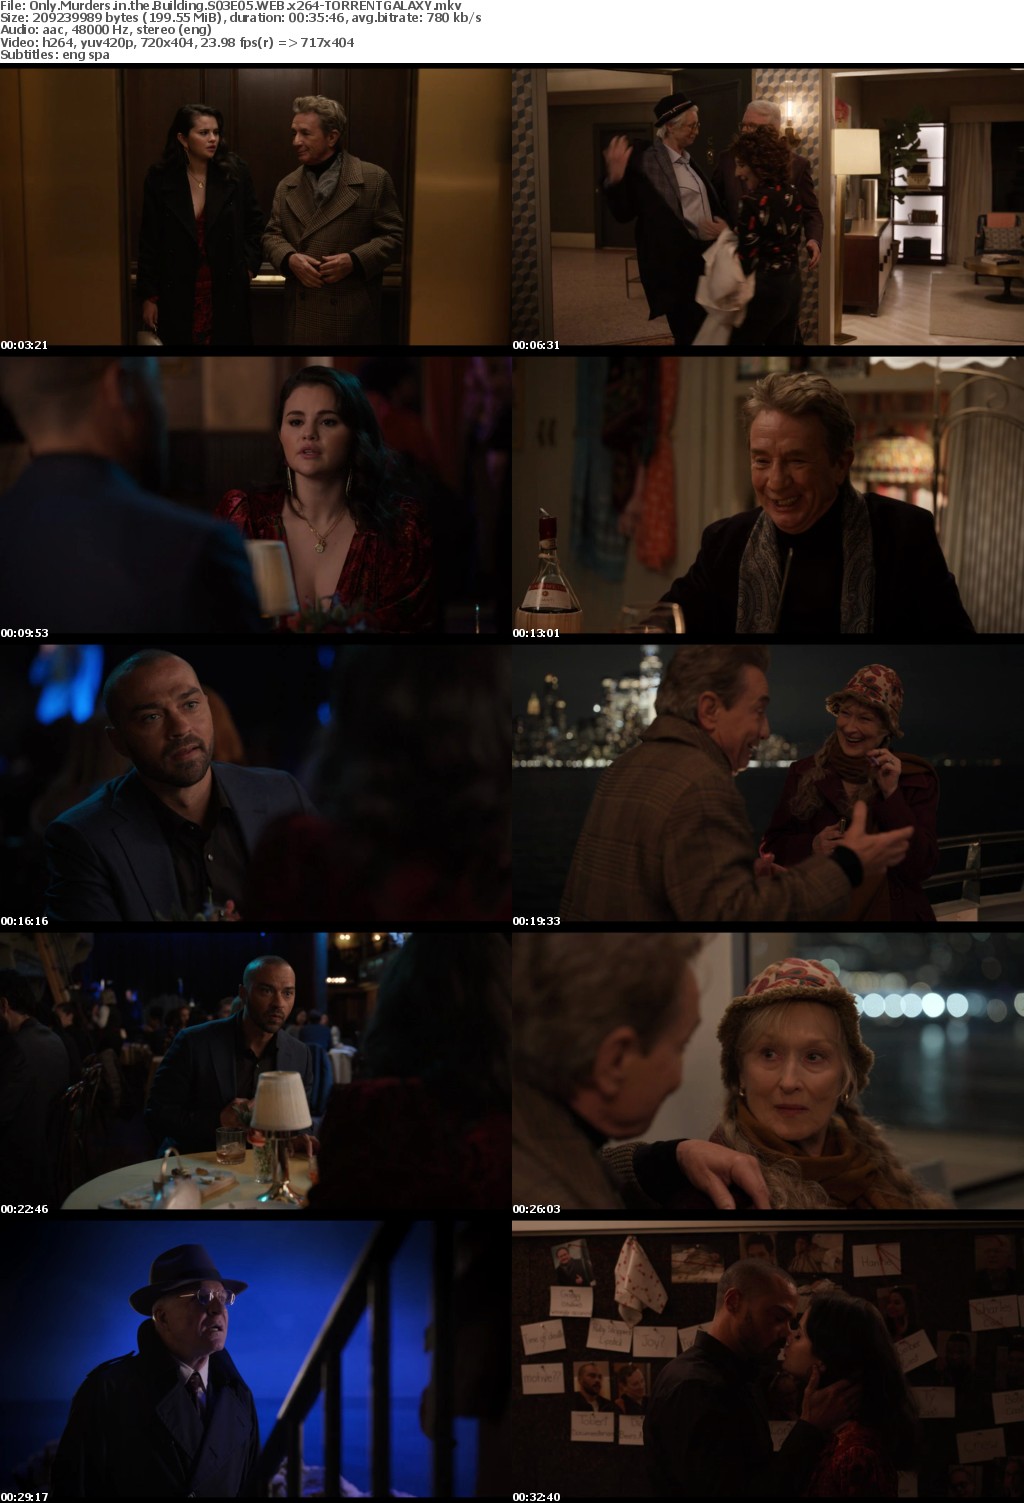 Only Murders in the Building S03E05 WEB x264-GALAXY